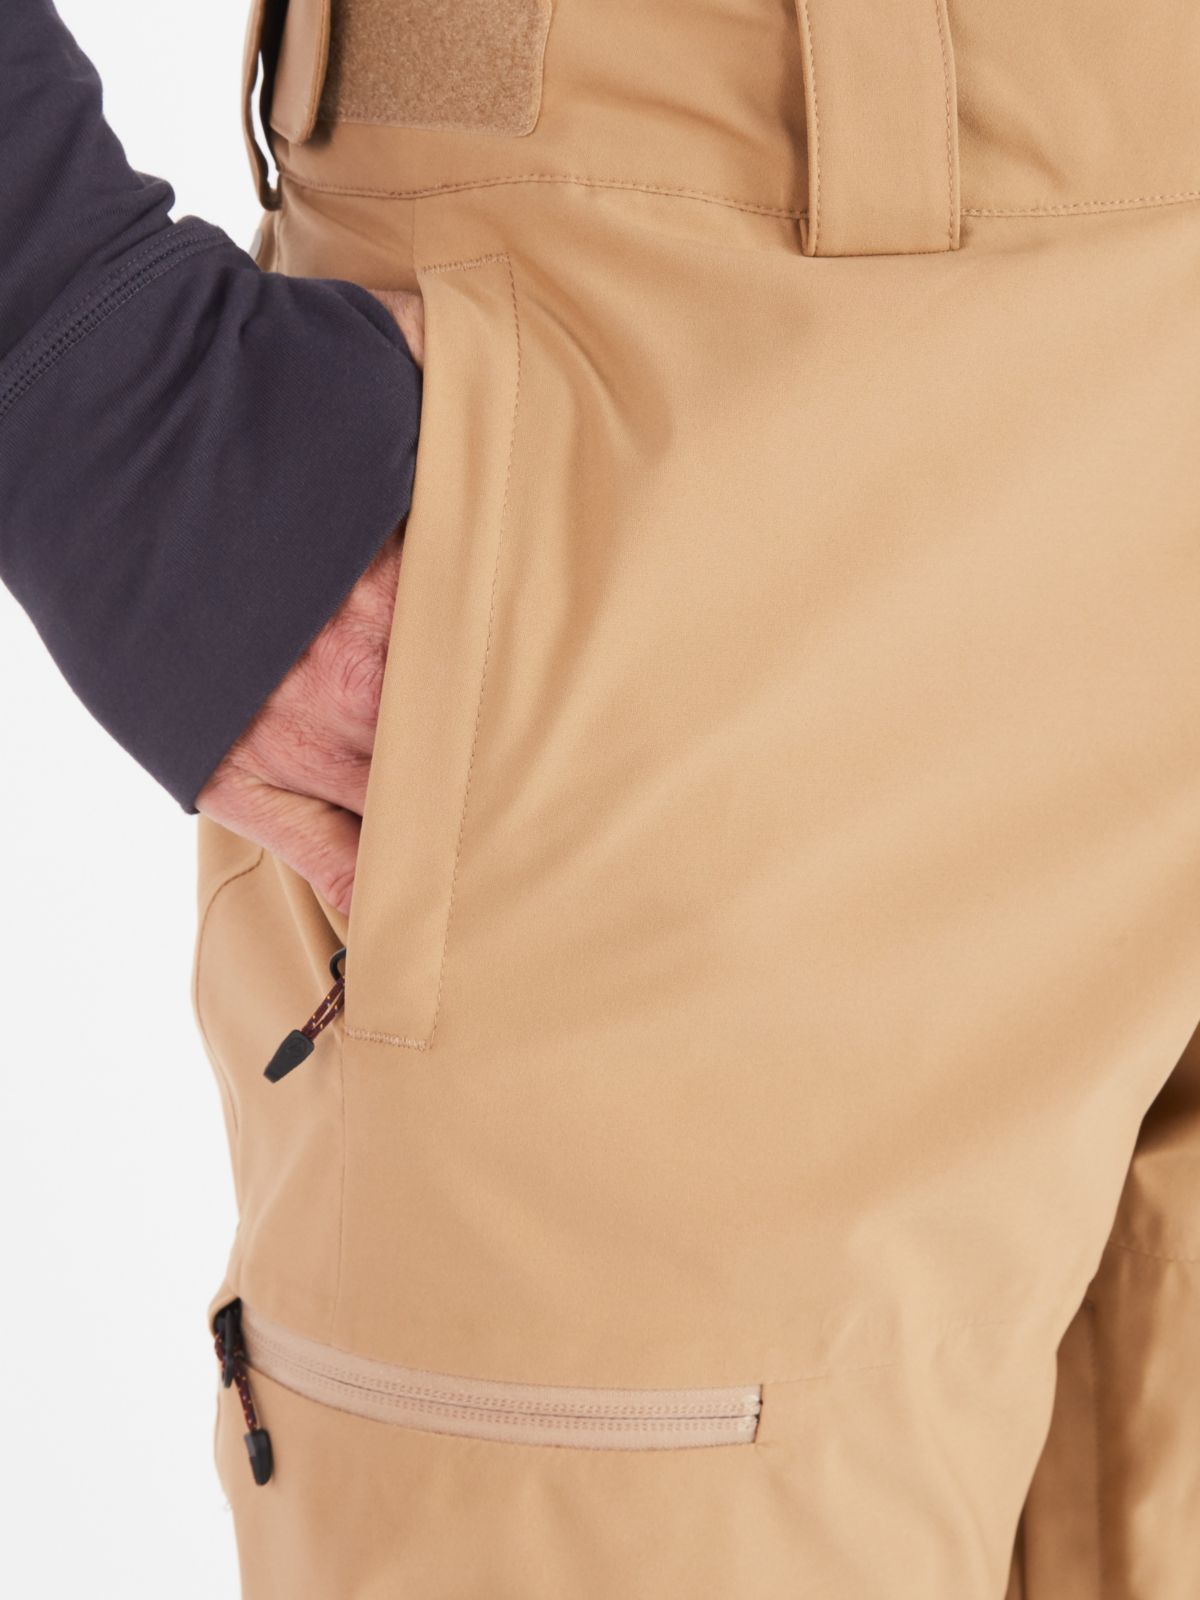 Man with hand in pants pocket